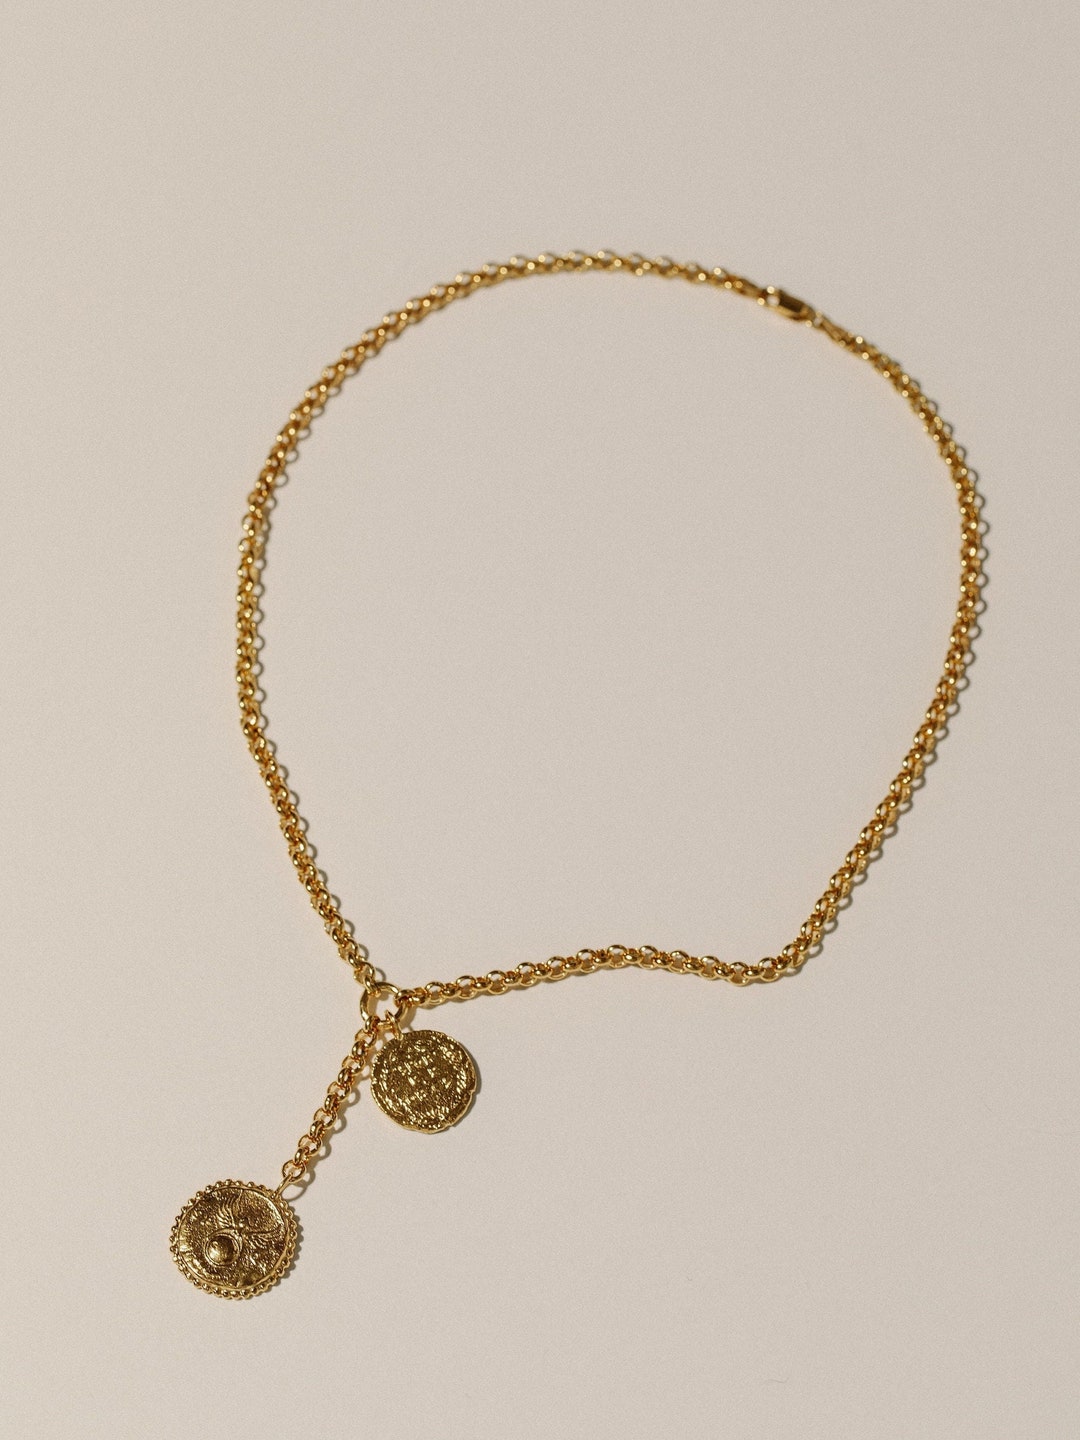 Gold Coin Lariat Necklace Guardian of Might 24K Gold Plated 